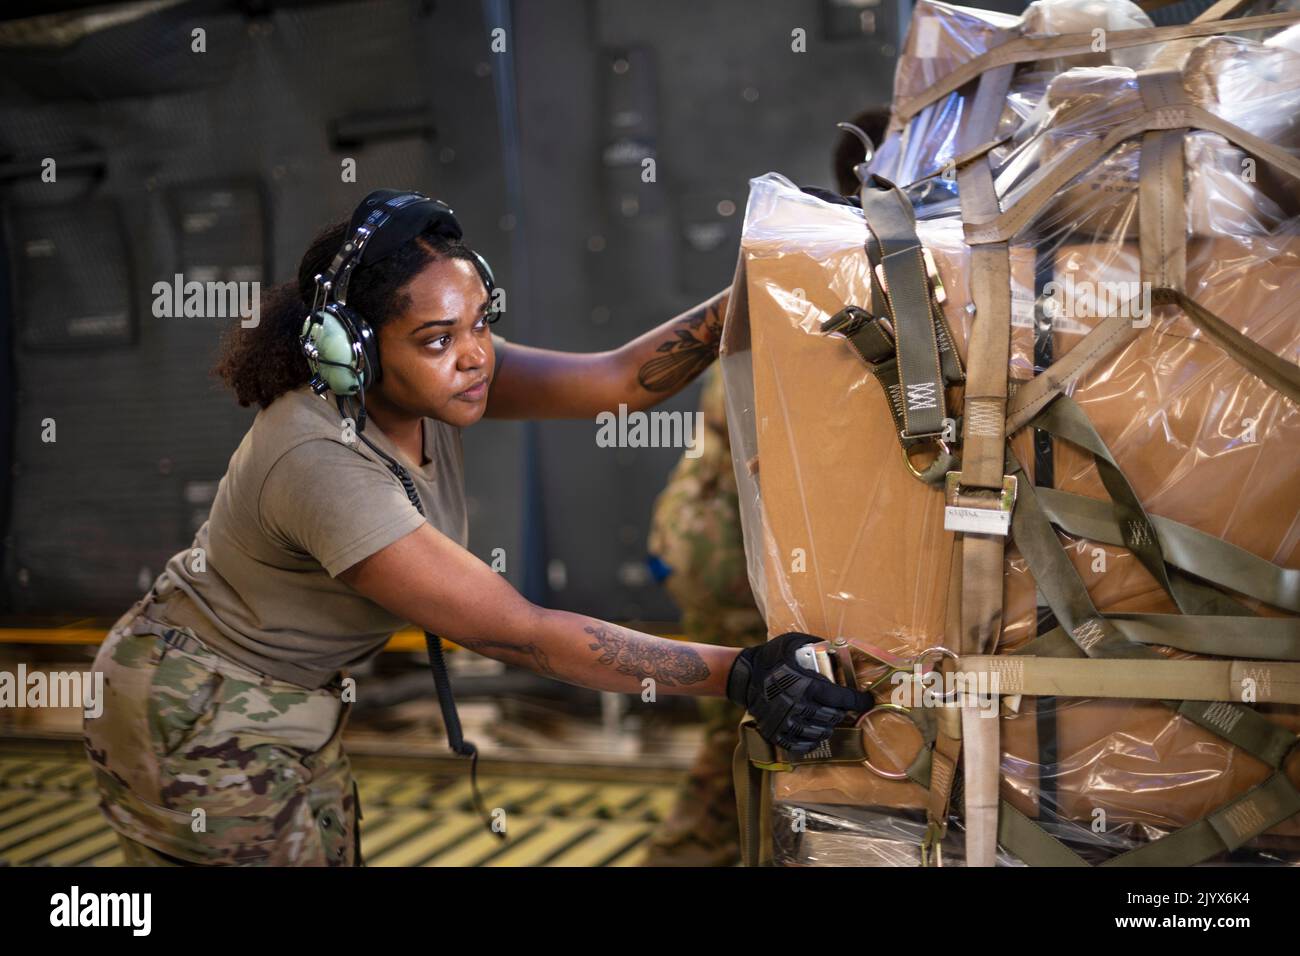 Honduras. 26th Aug, 2022. U.S. Air Force Senior Airman Symone Chur Martin, 22nd Airlift Squadron loadmaster apprentice, pushes a pallet off a C-5M Super Galaxy at Soto Cano Air Base, Honduras, Augustust 26, 2022. The C-5M delivered over 90,000 pounds of humanitarian aid through the Denton Program. The Denton Program allows private U.S. citizens and private organizations to transport humanitarian goods to approved countries in need. Credit: U.S. Air Force/ZUMA Press Wire Service/ZUMAPRESS.com/Alamy Live News Stock Photo